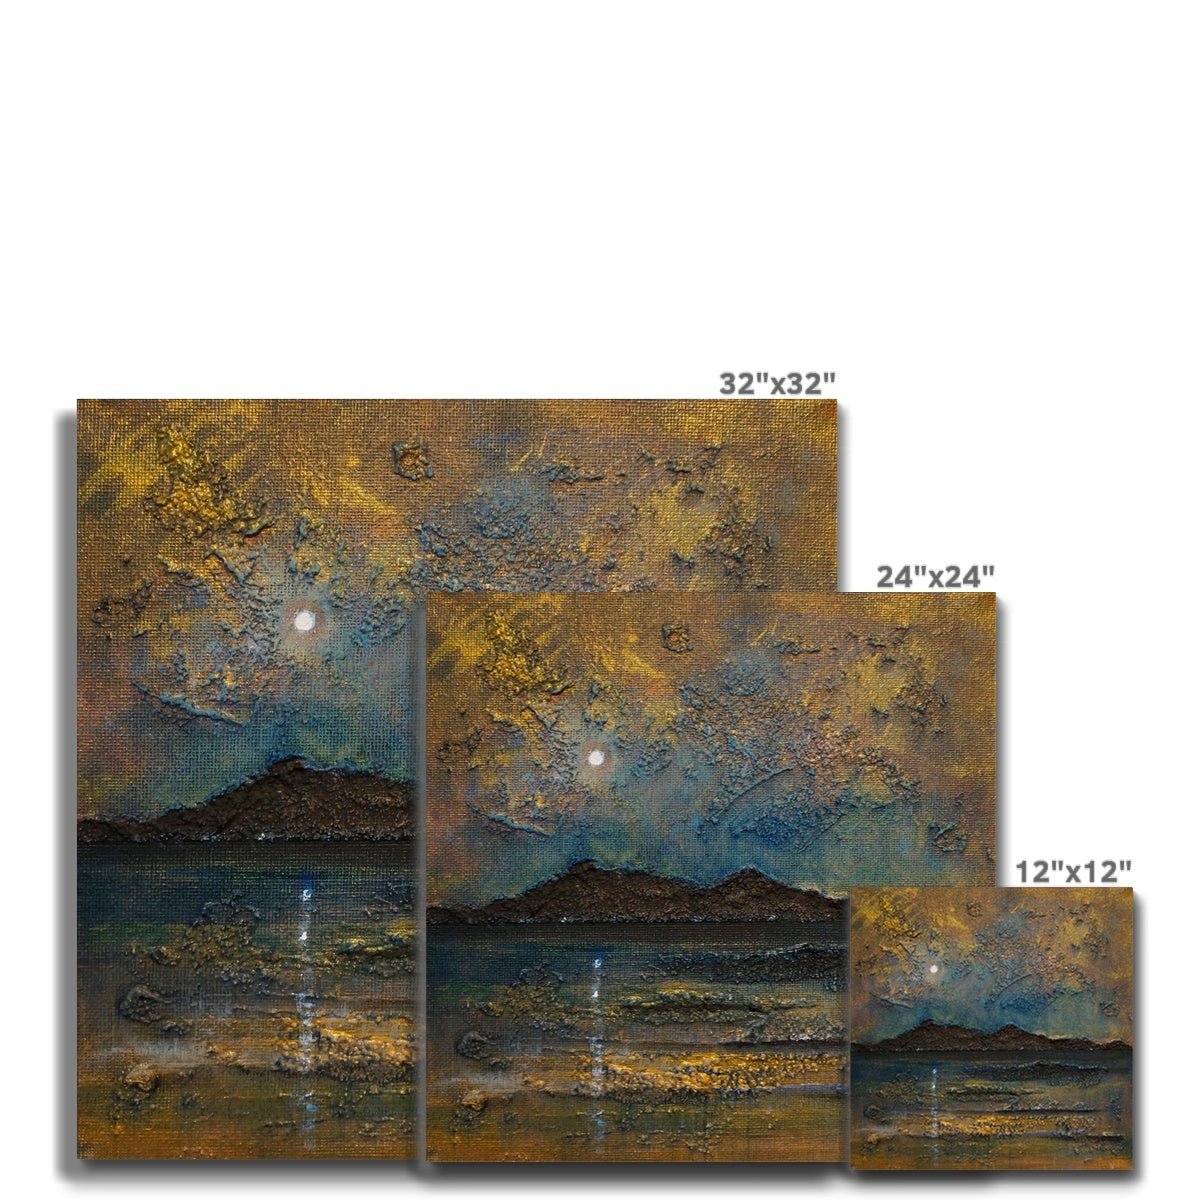 Arran Moonlight Painting | Canvas From Scotland-Contemporary Stretched Canvas Prints-Arran Art Gallery-Paintings, Prints, Homeware, Art Gifts From Scotland By Scottish Artist Kevin Hunter